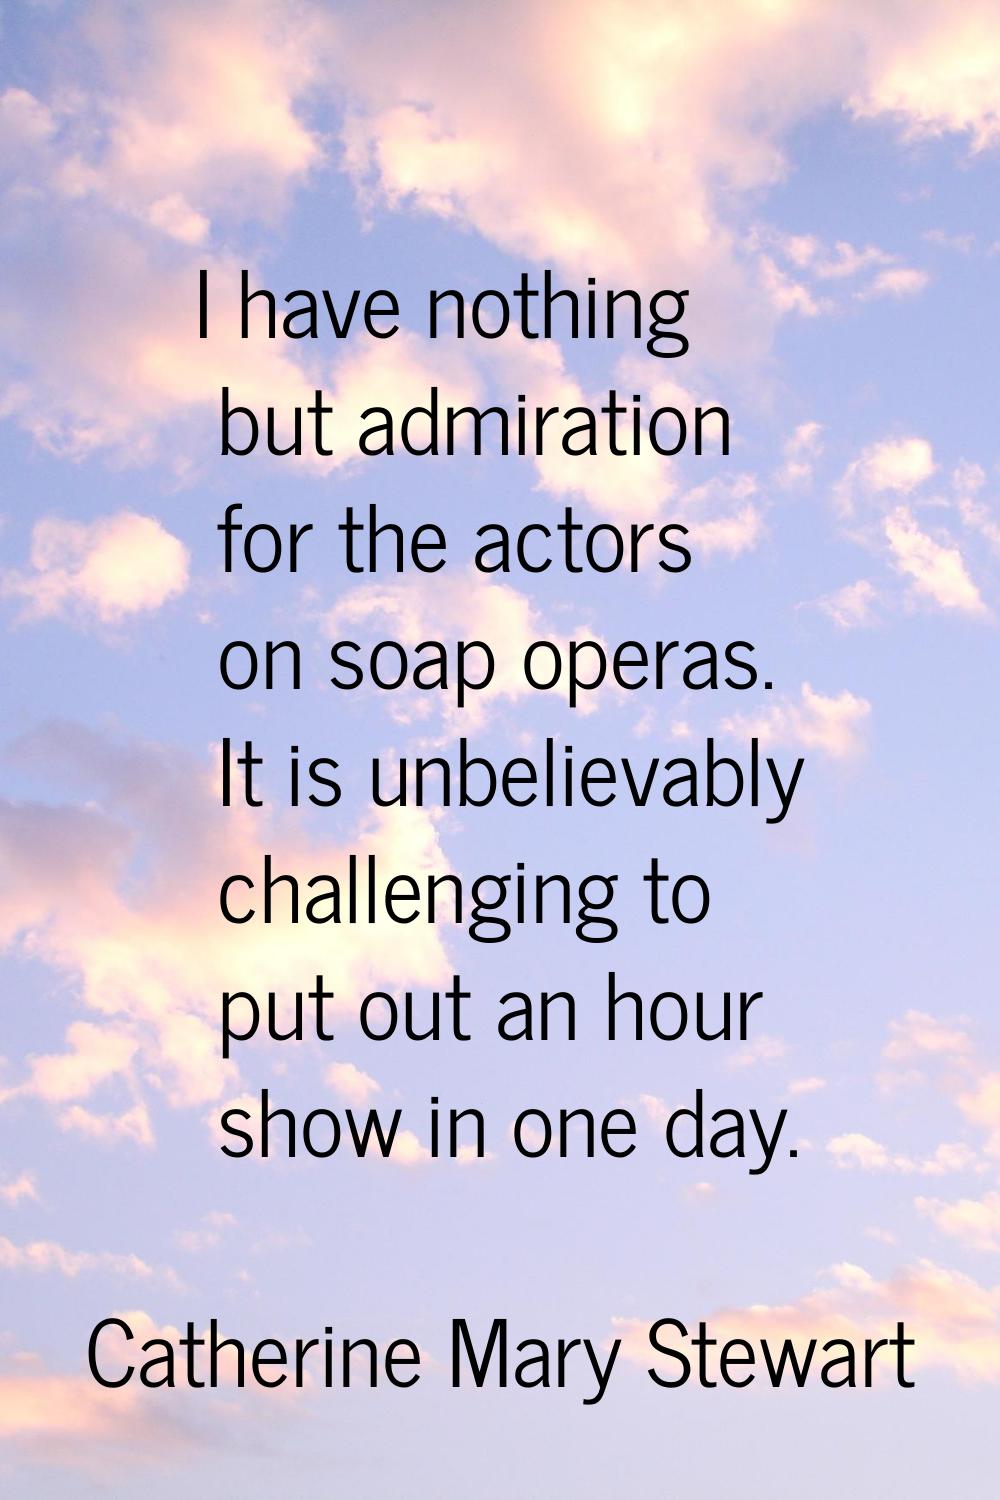 I have nothing but admiration for the actors on soap operas. It is unbelievably challenging to put 